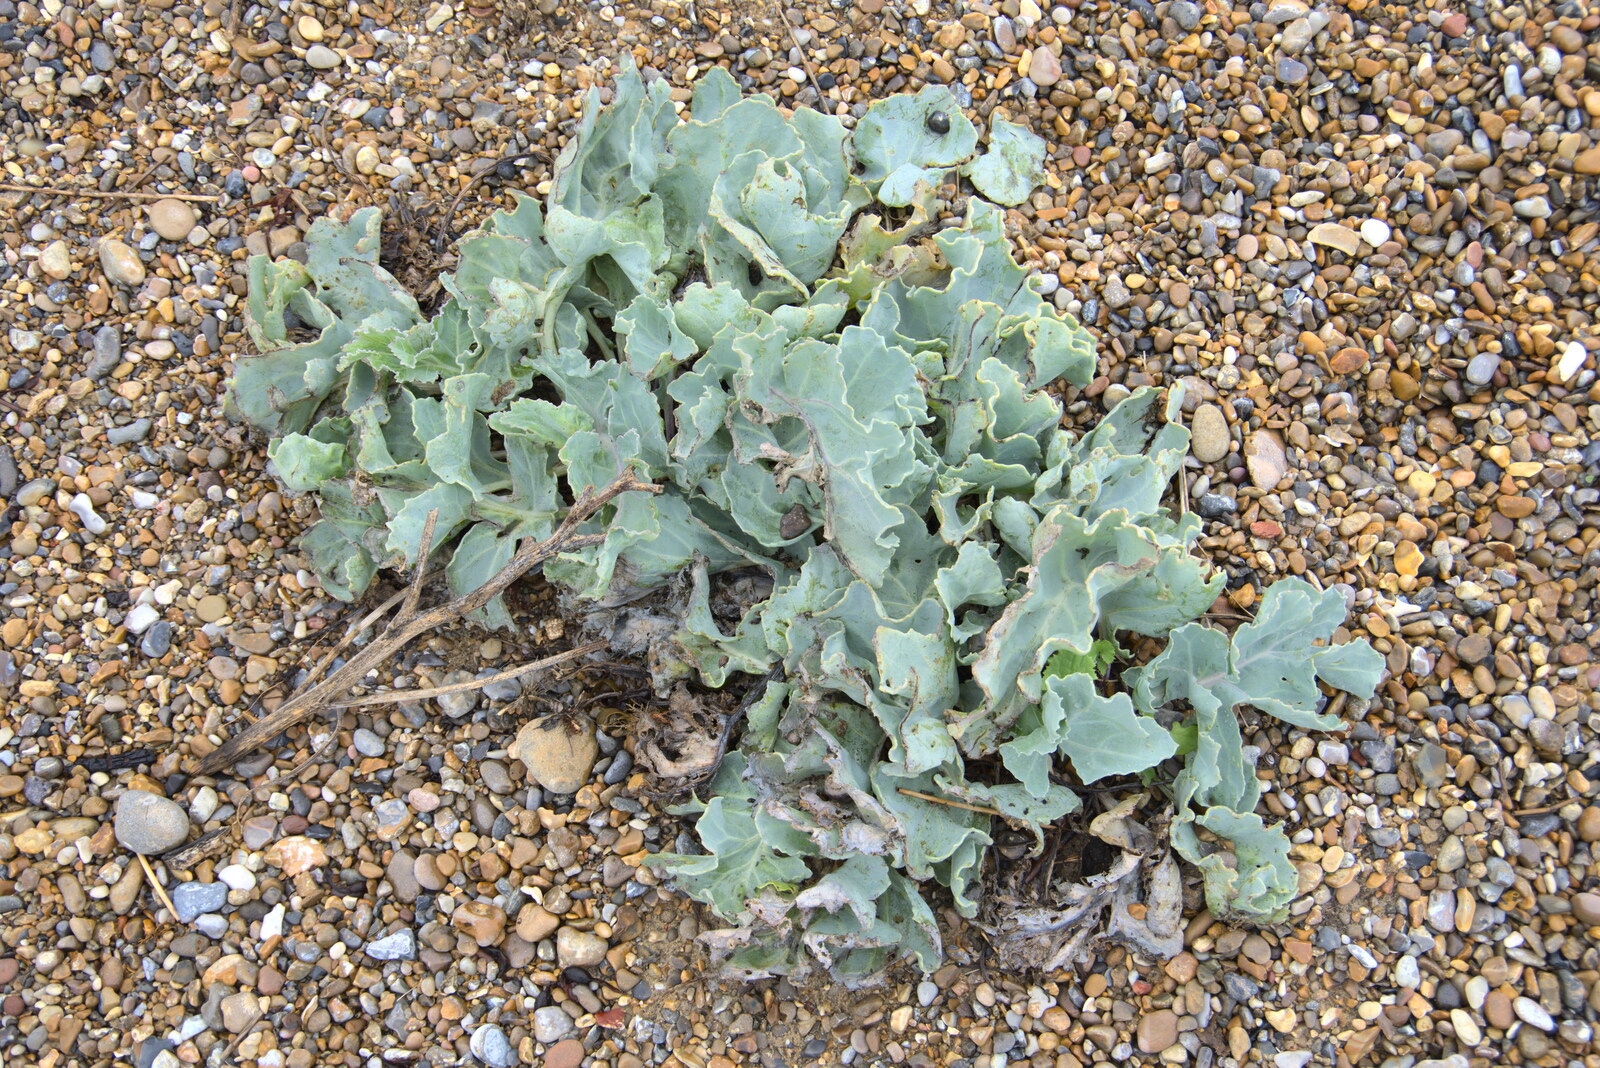 Some sea cabbage from Sizewell Beach and the Lion Pub, Sizewell and Theberton, Suffolk - 4th October 2020